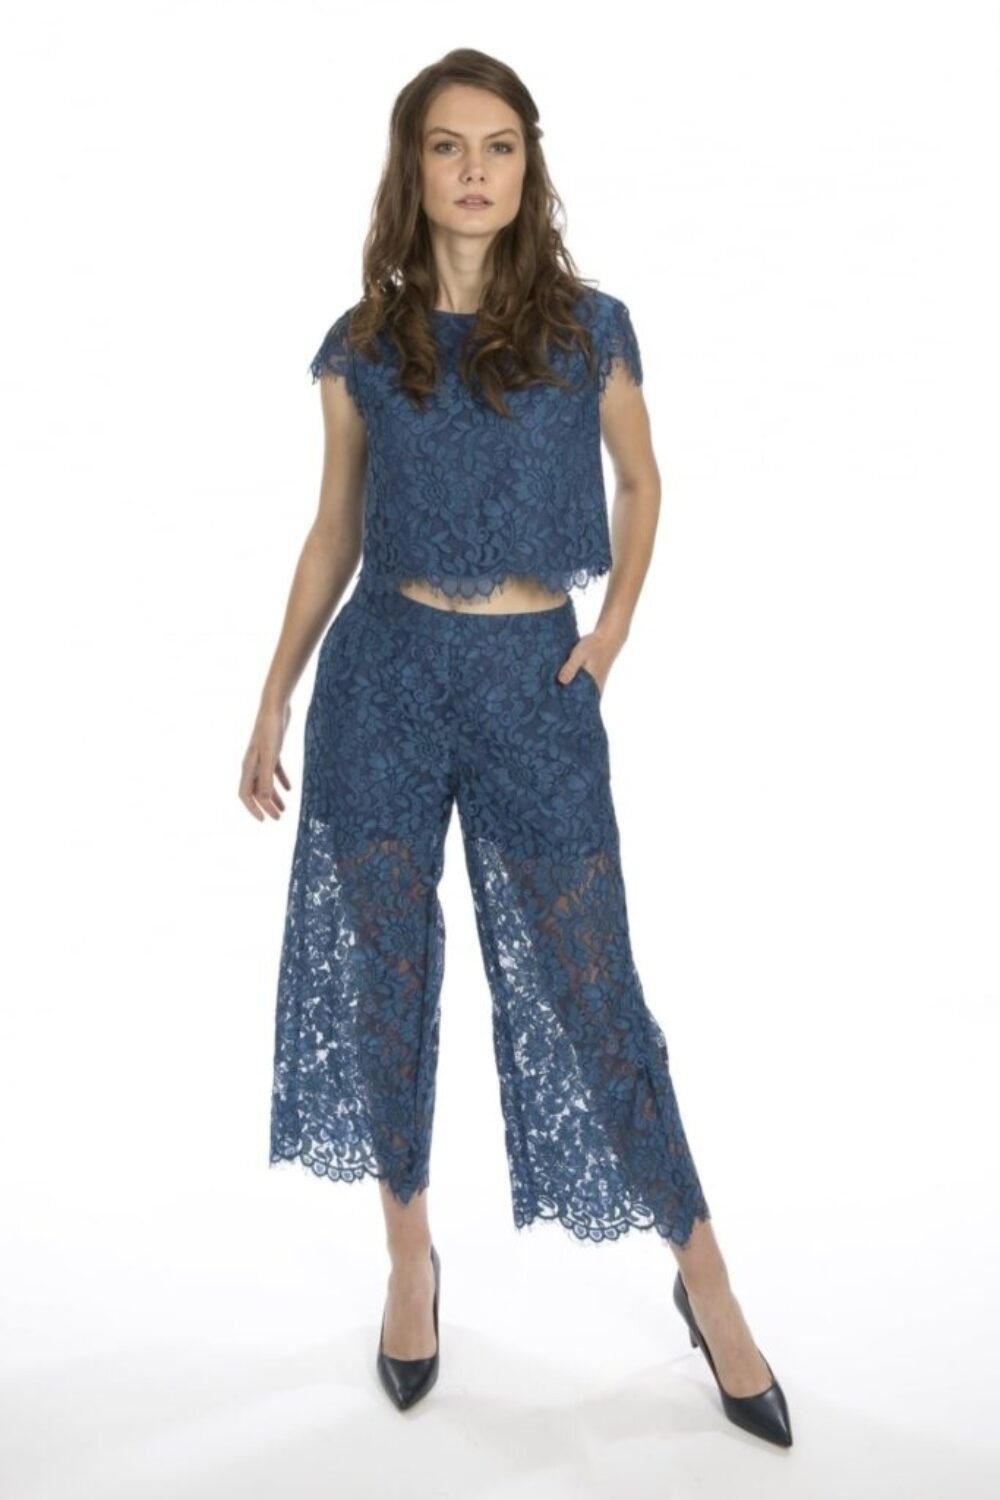 Shop Lux Blue Vintage Lace Top and women's luxury and designer clothes at www.lux-apparel.co.uk